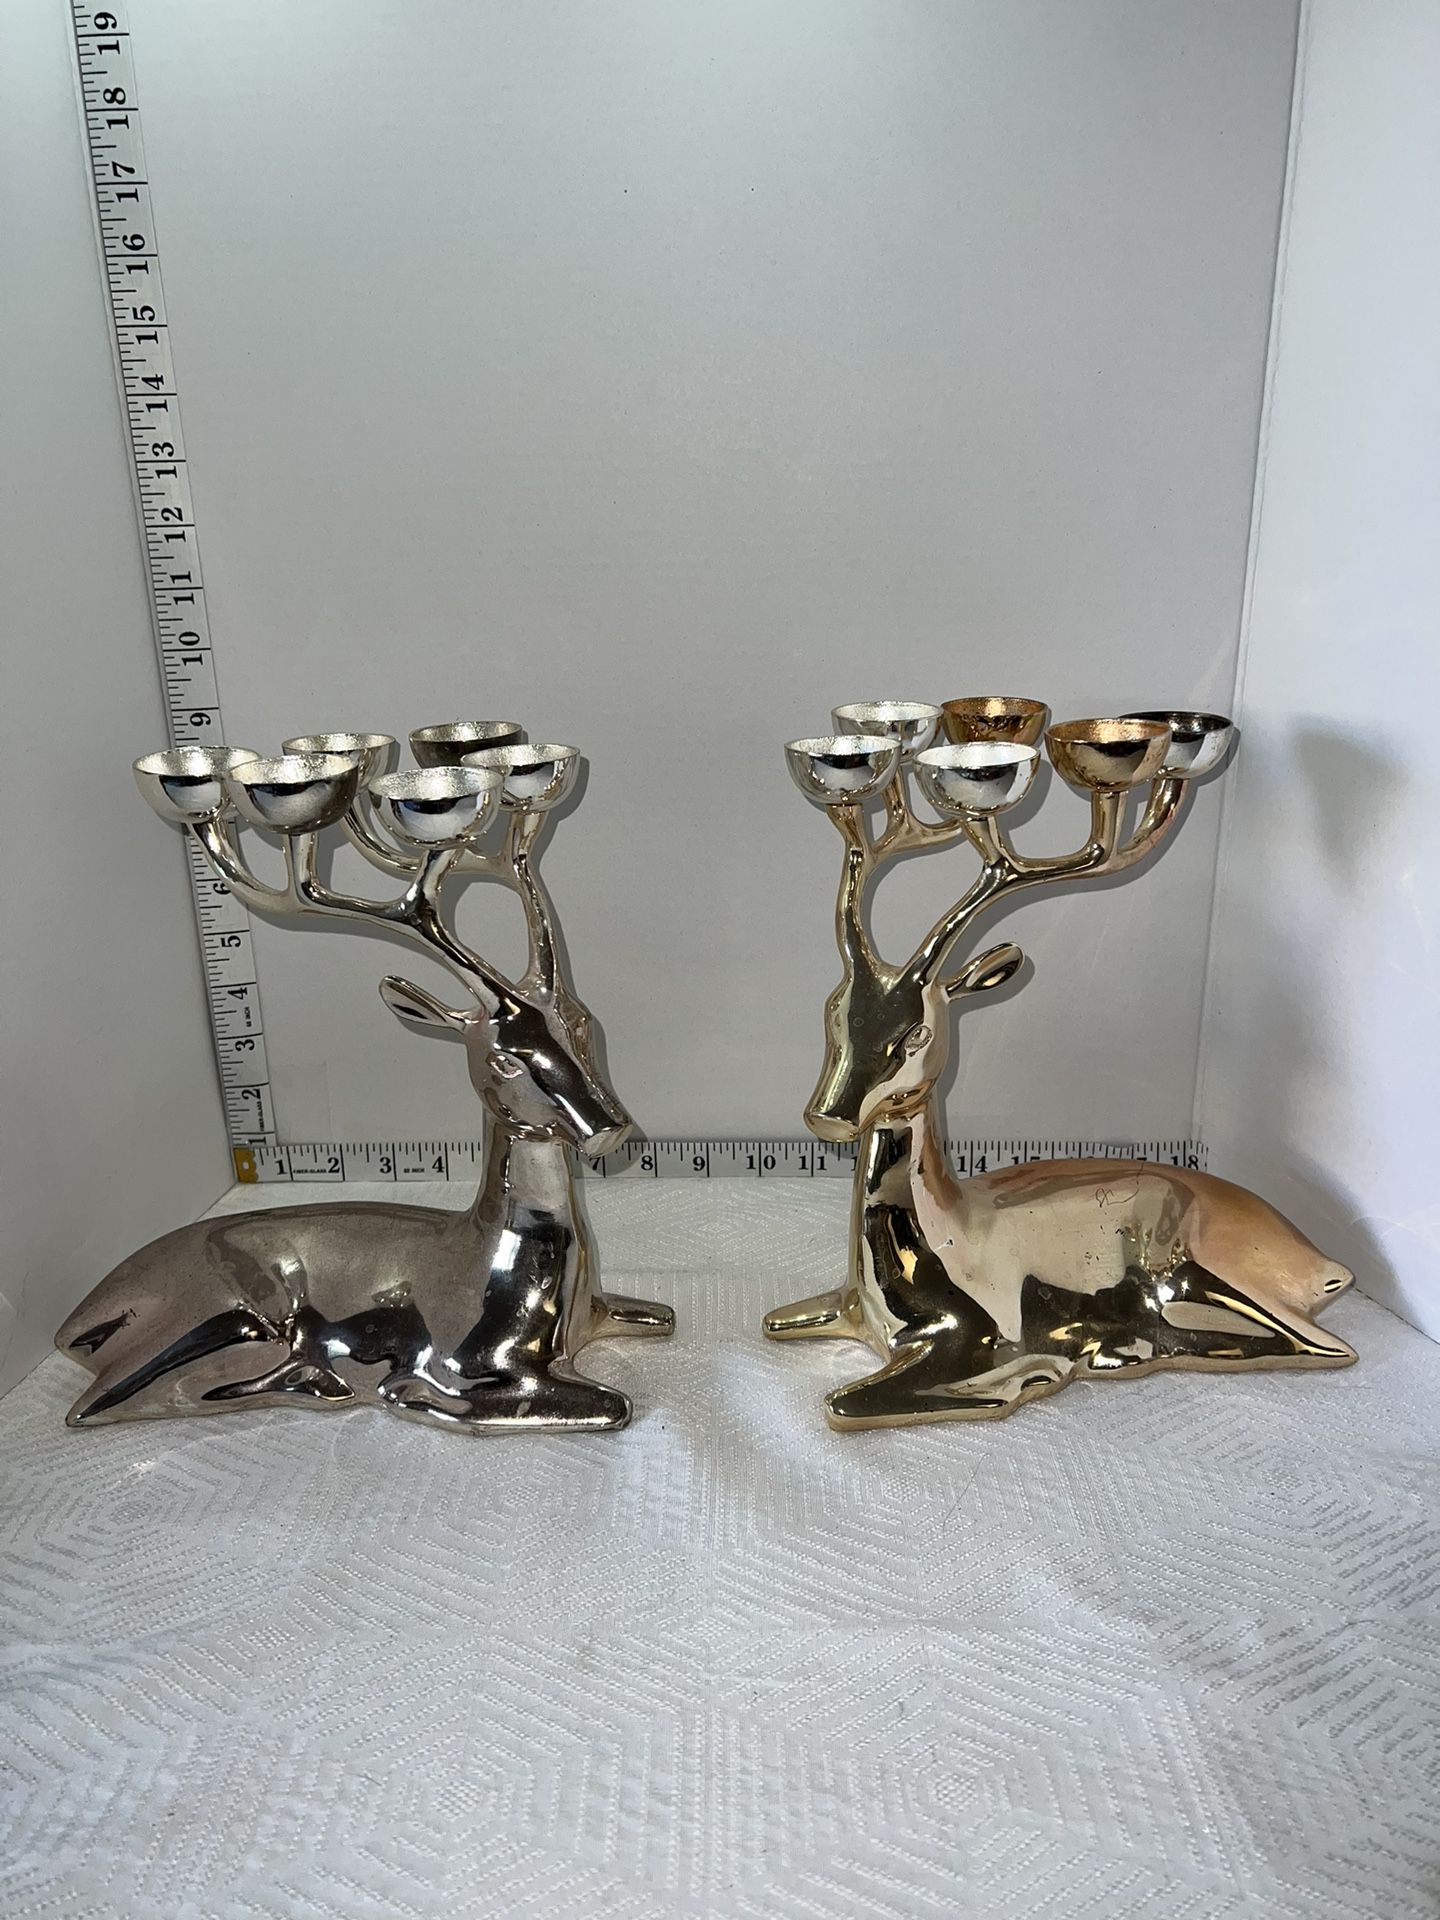 Vintage Brass Christmas Reindeer Candle Sticks Holder Set of 2 heavy laying down